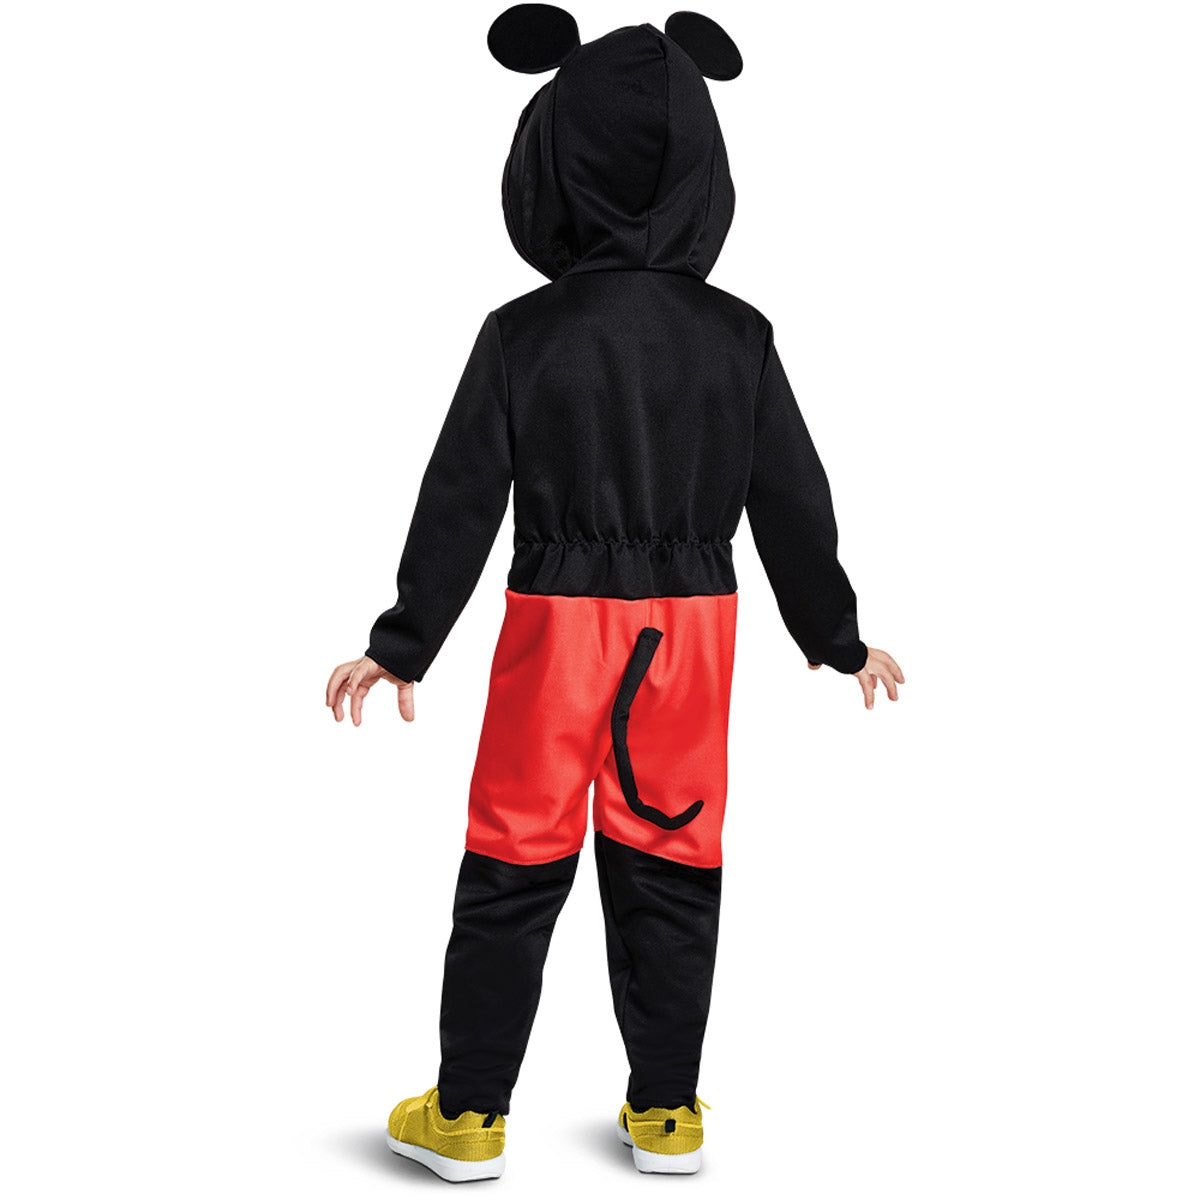 Mickey Mouse Infant Disguise 12000